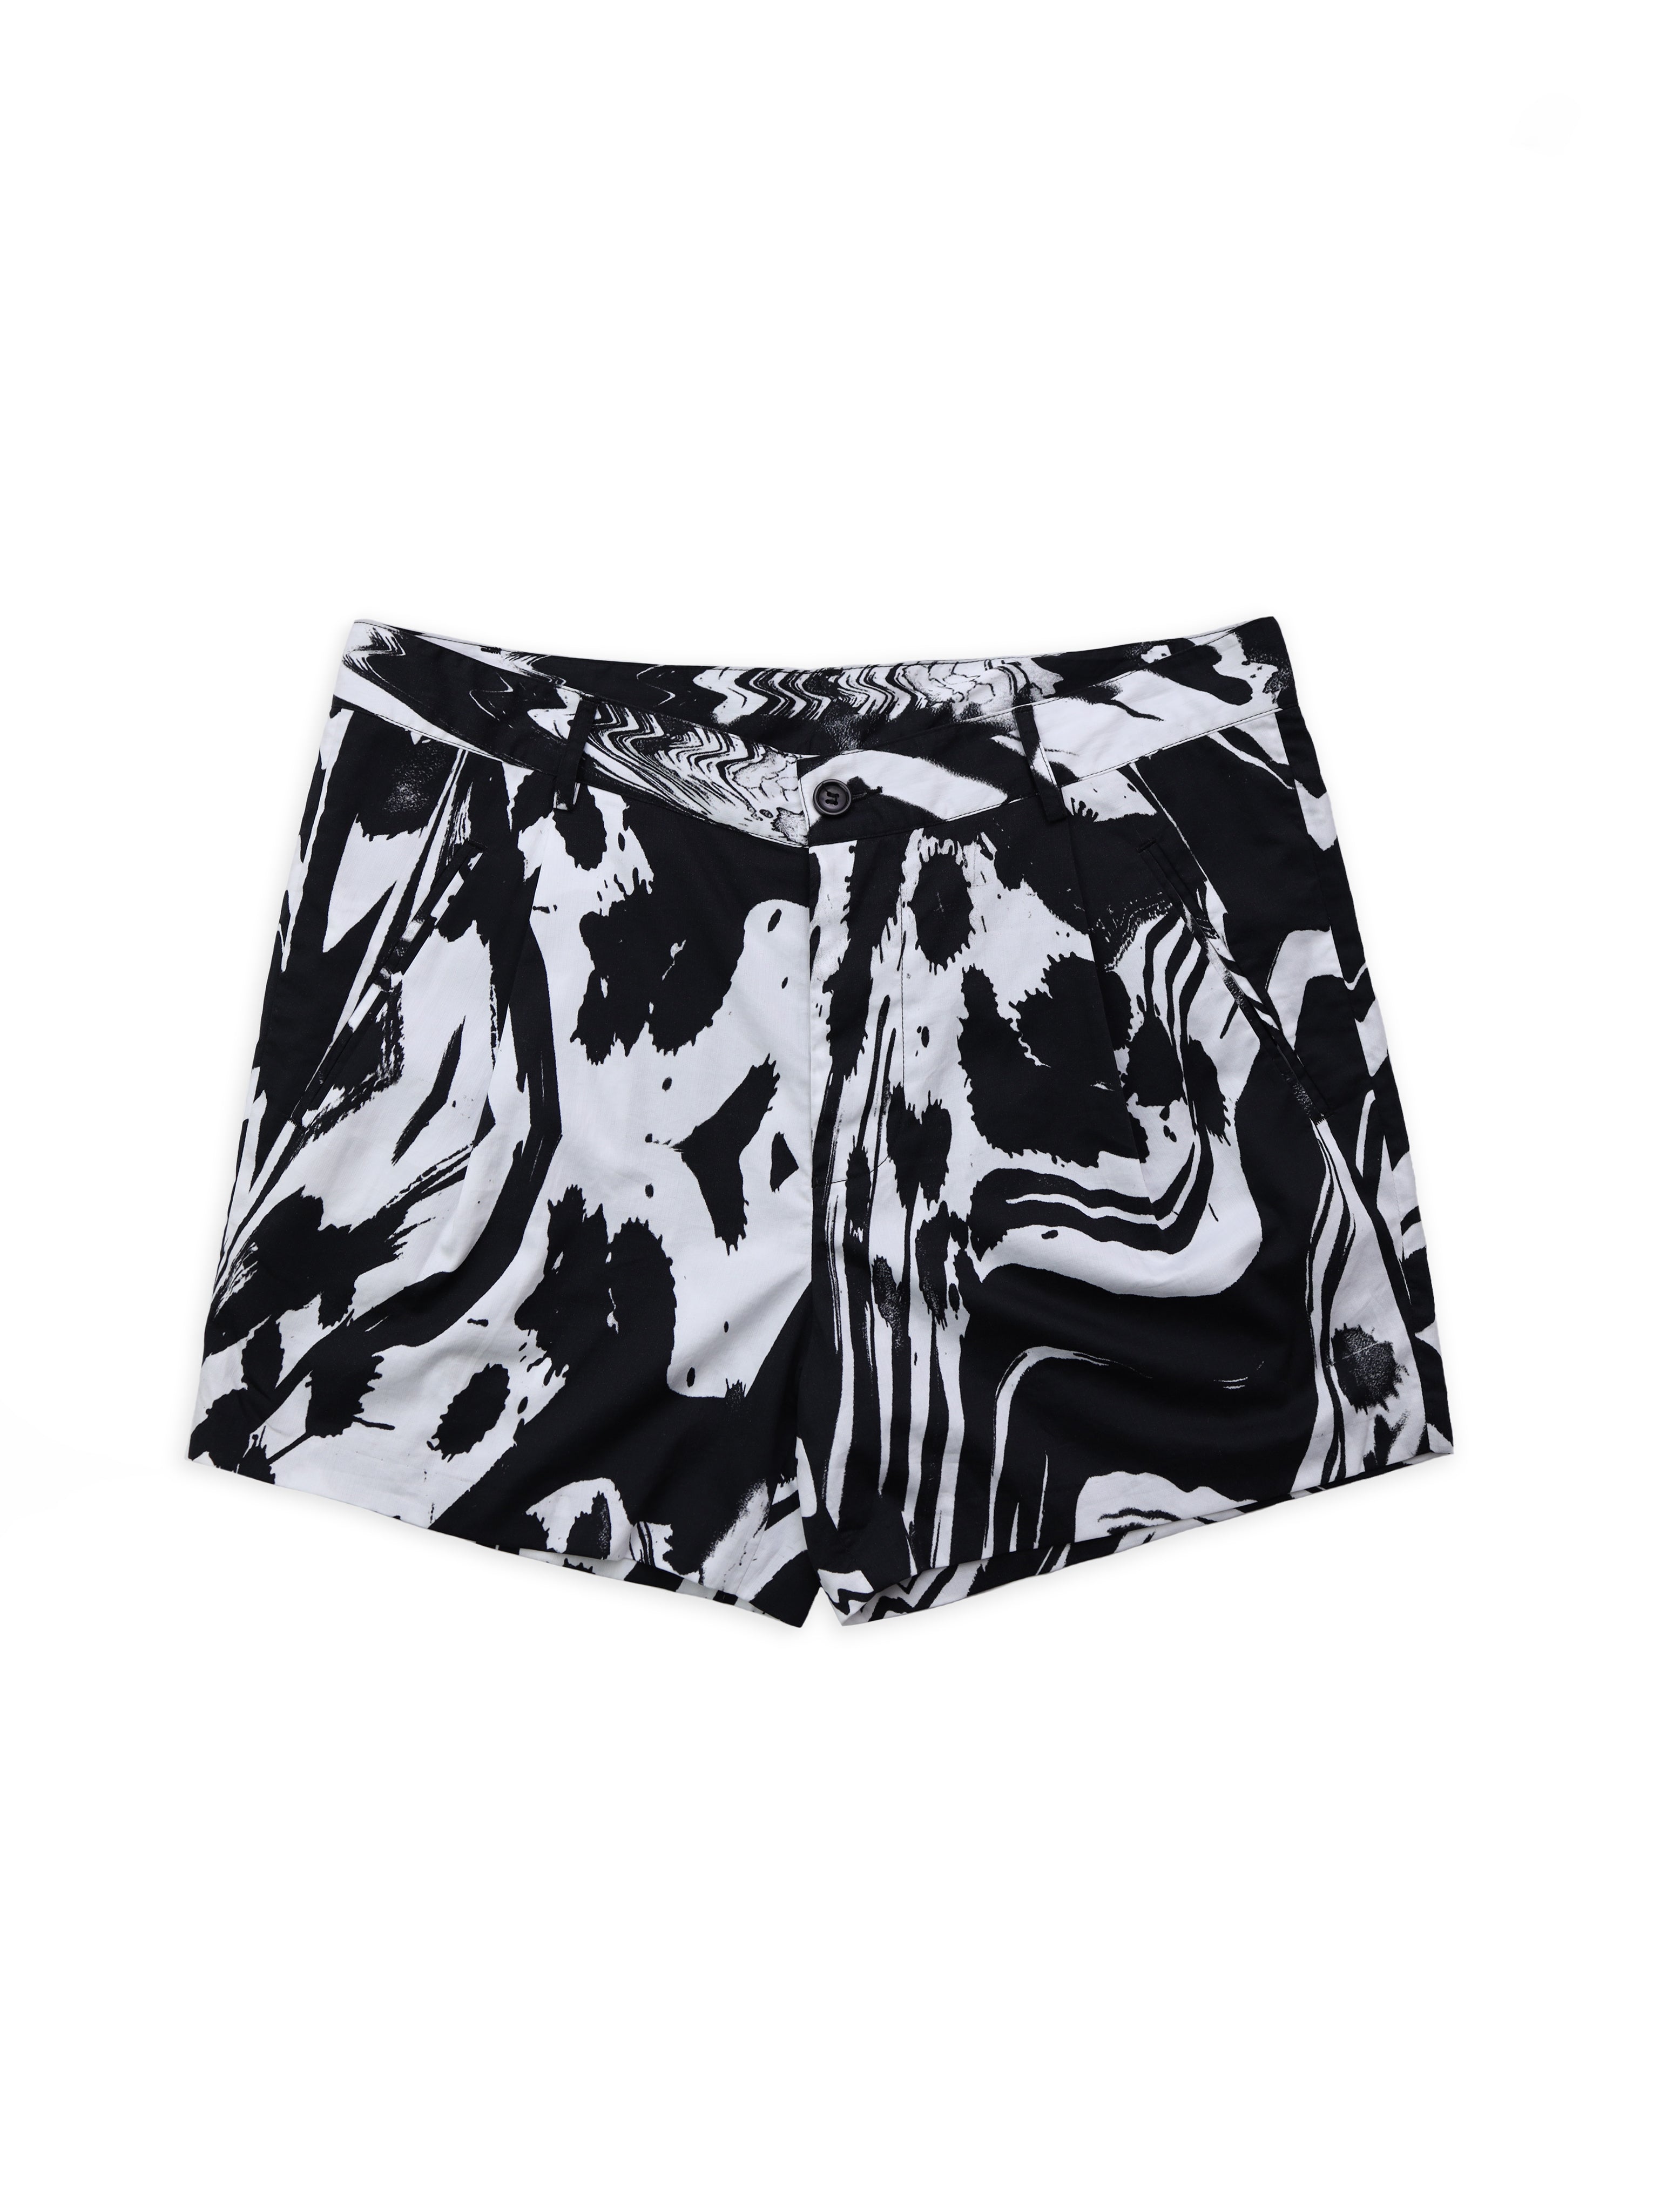 Black And White Paint Shorts